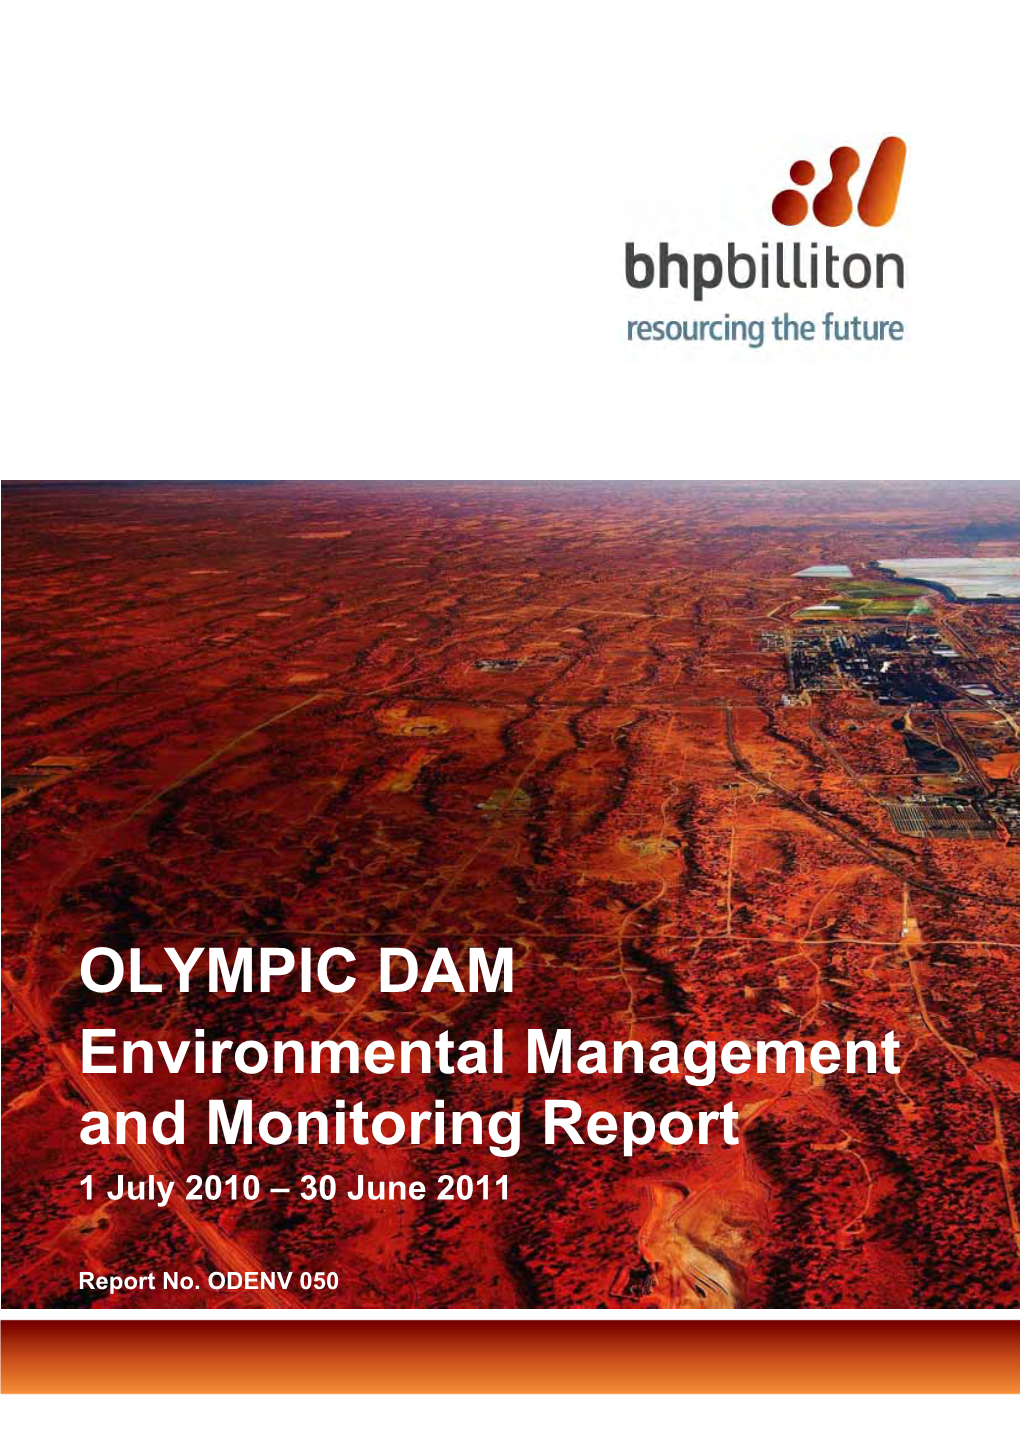 OLYMPIC DAM Environmental Management and Monitoring Report 1 July 2010 – 30 June 2011